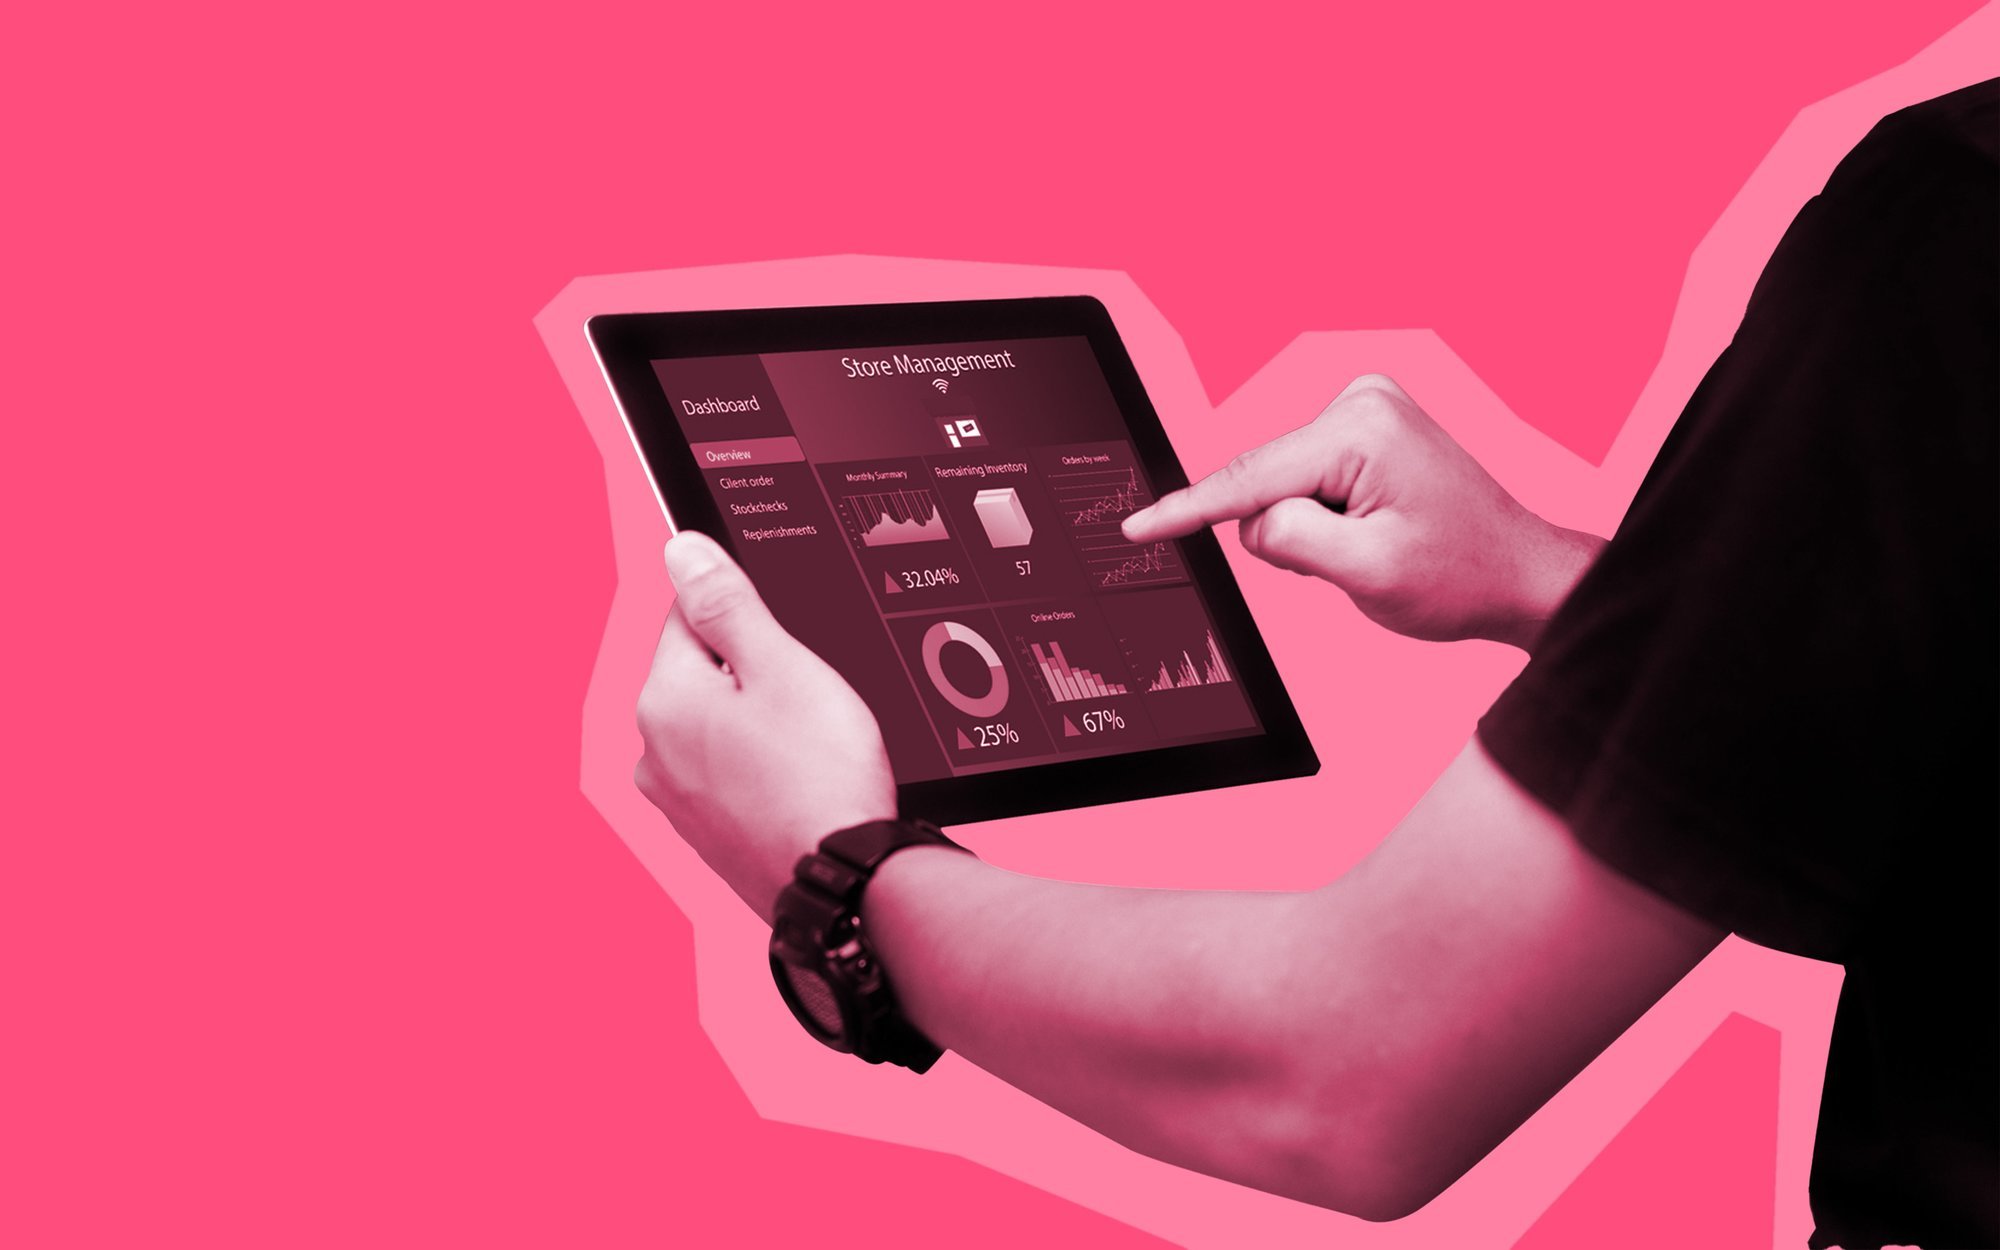 Close-up black and white photo of a person using a tablet set against a hot pink background.